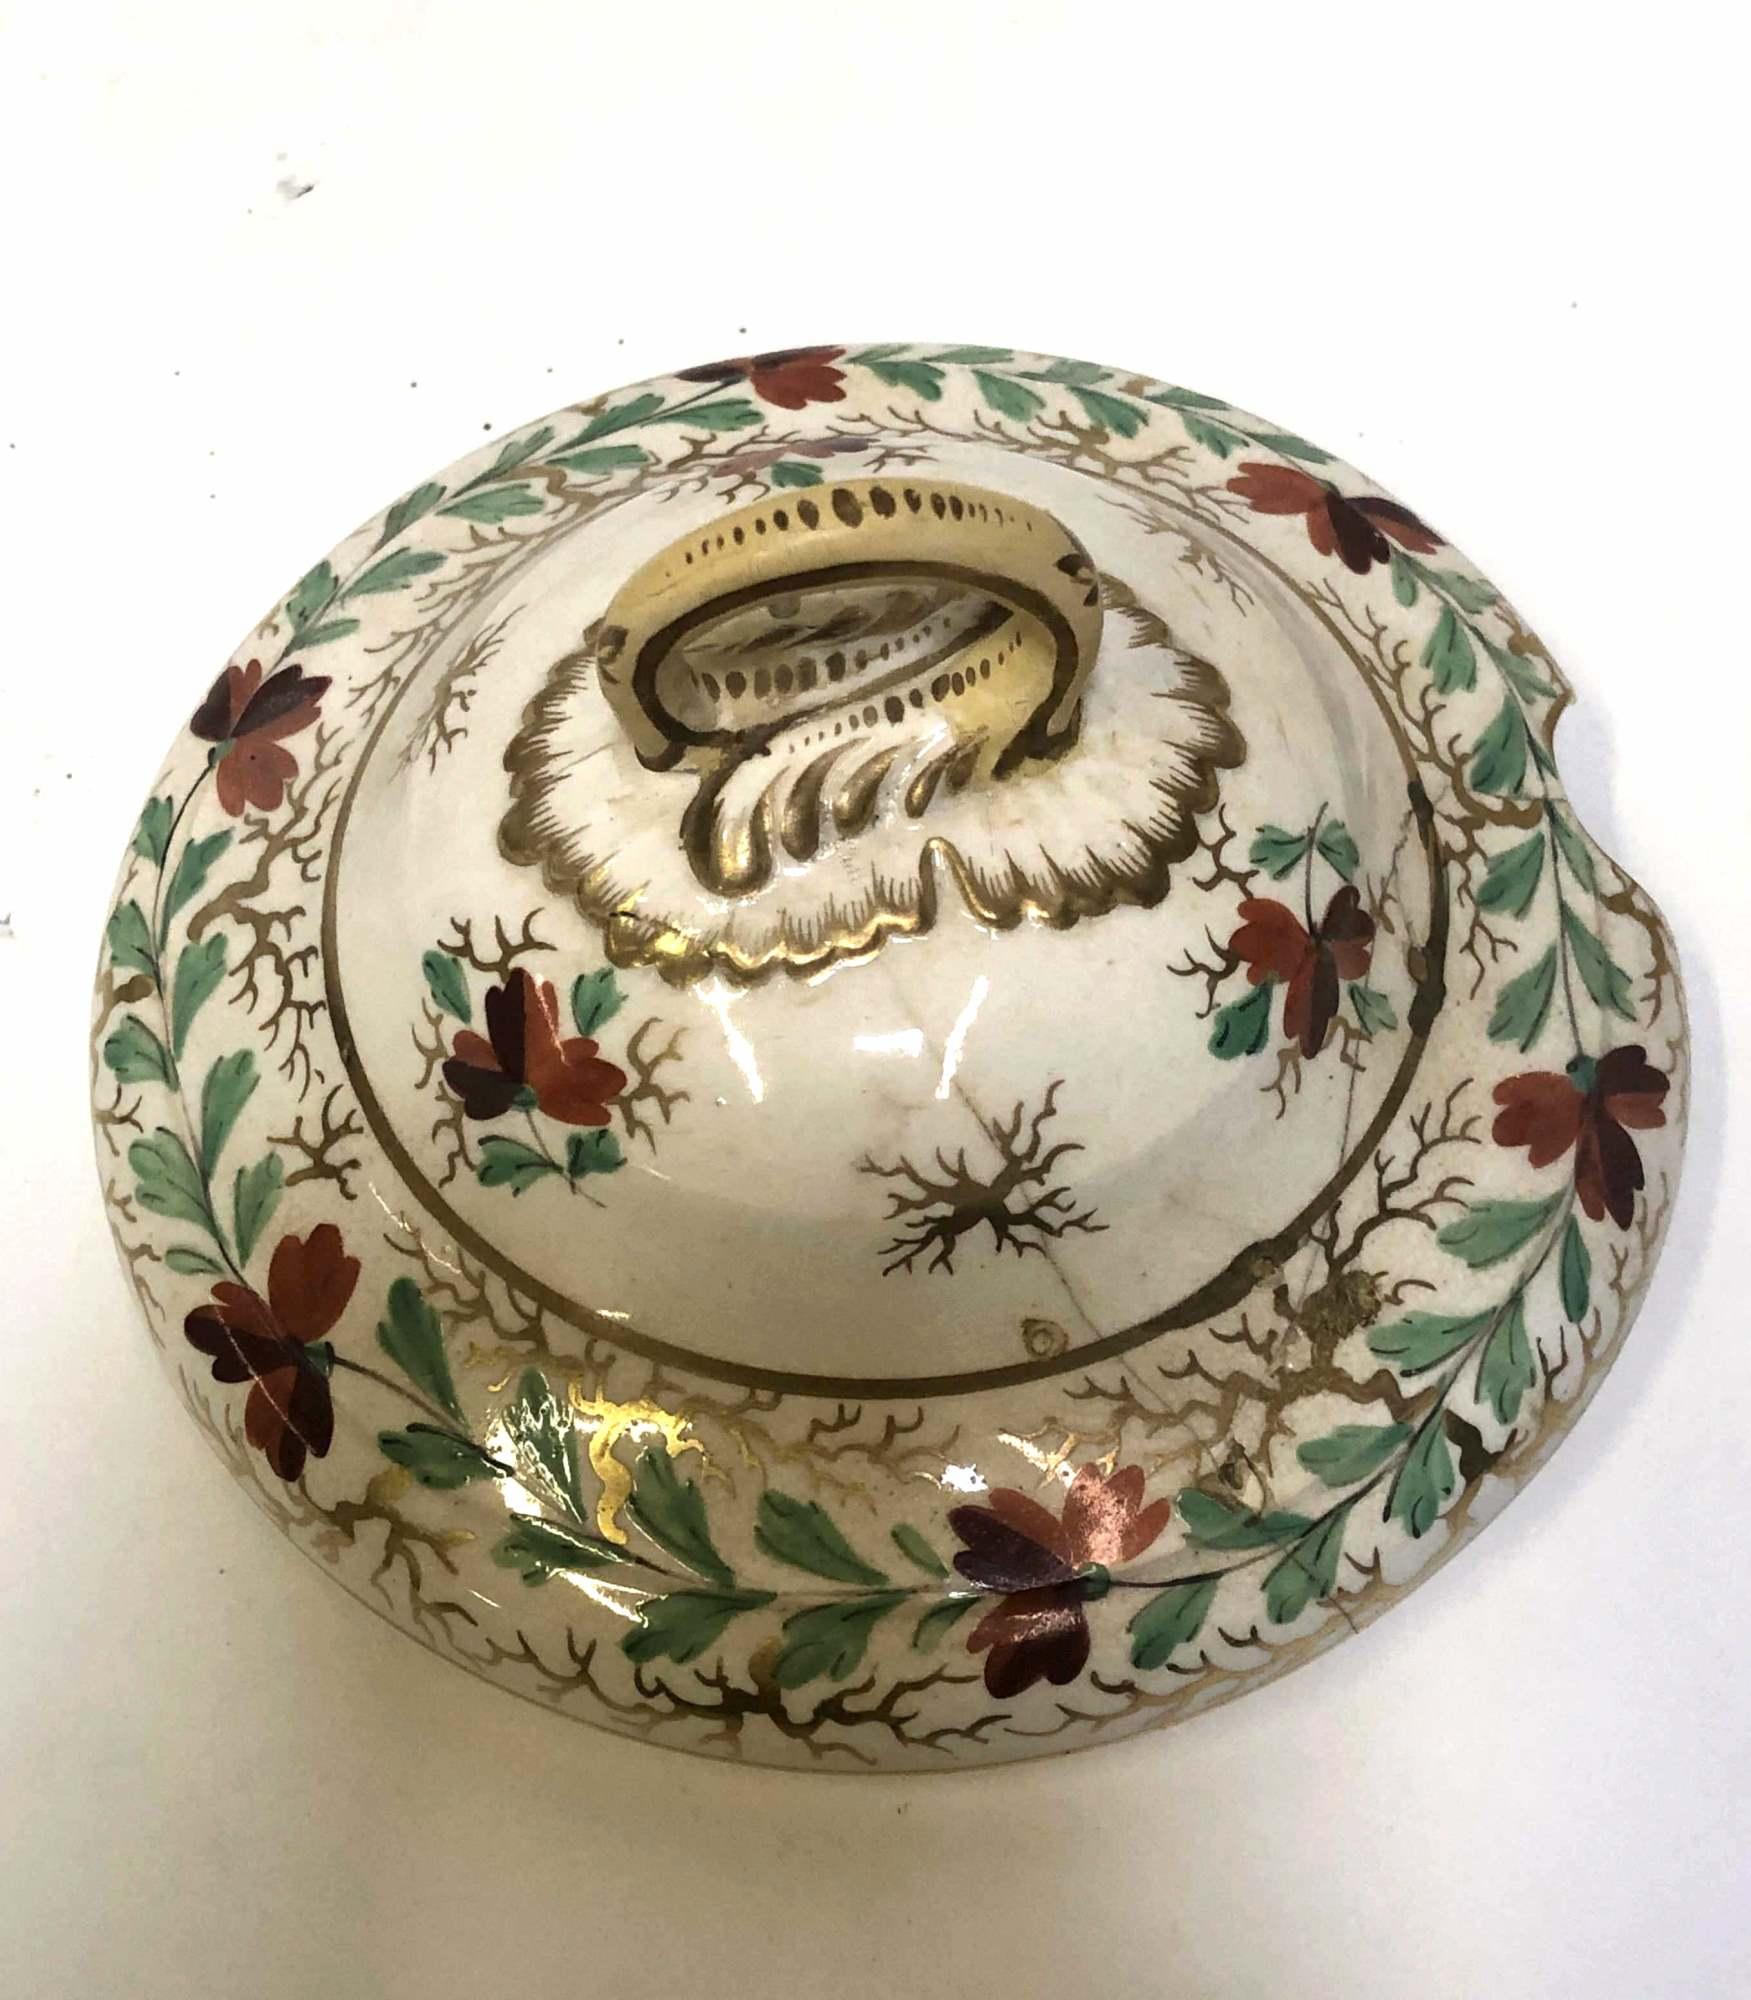 CROWN DERBY TUREEN WITH LID & STAND - 18th C?